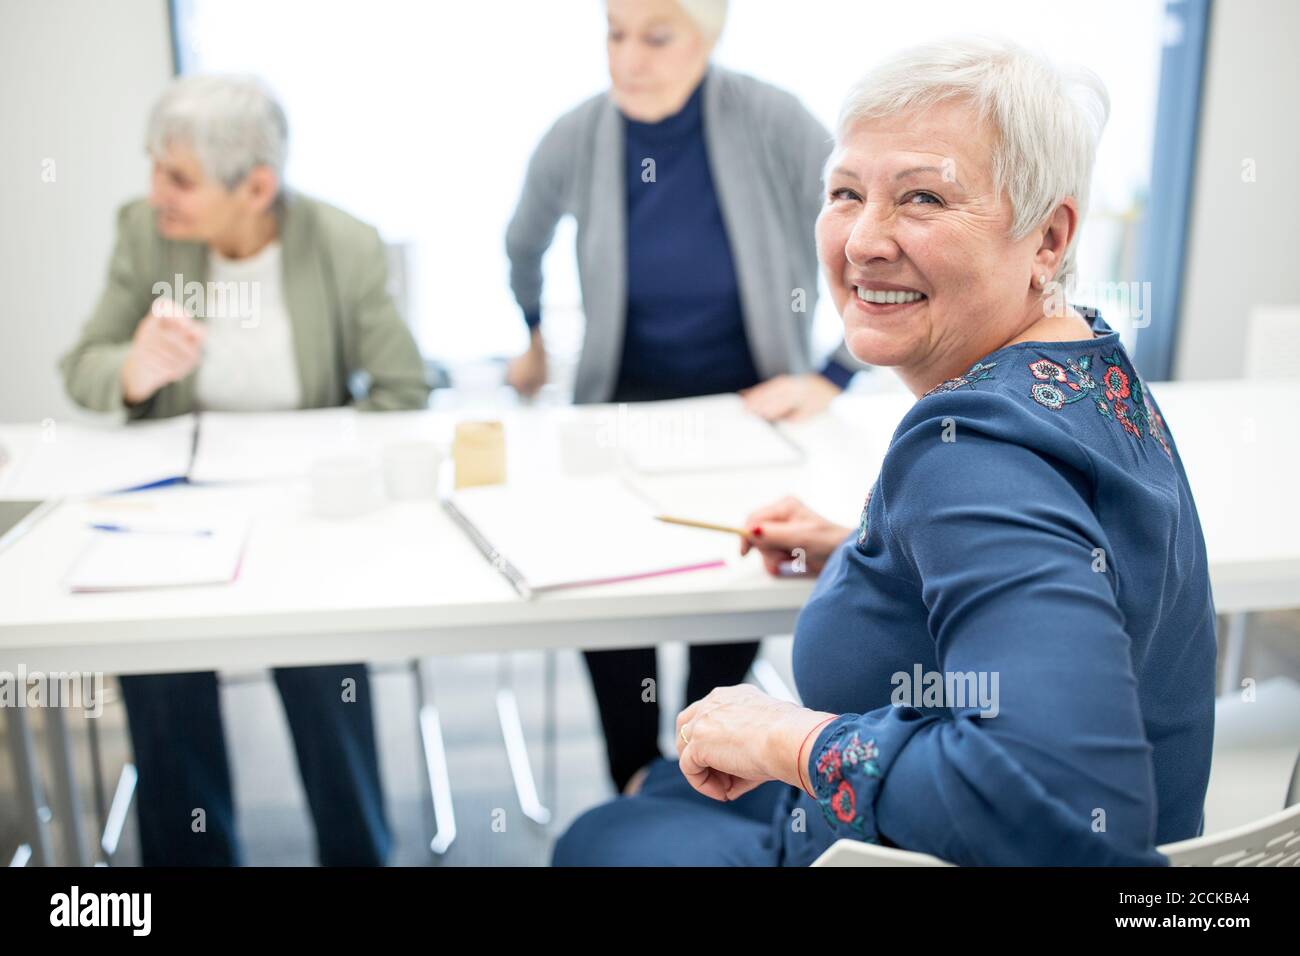 Group of active seniors attending seniors education course Stock Photo